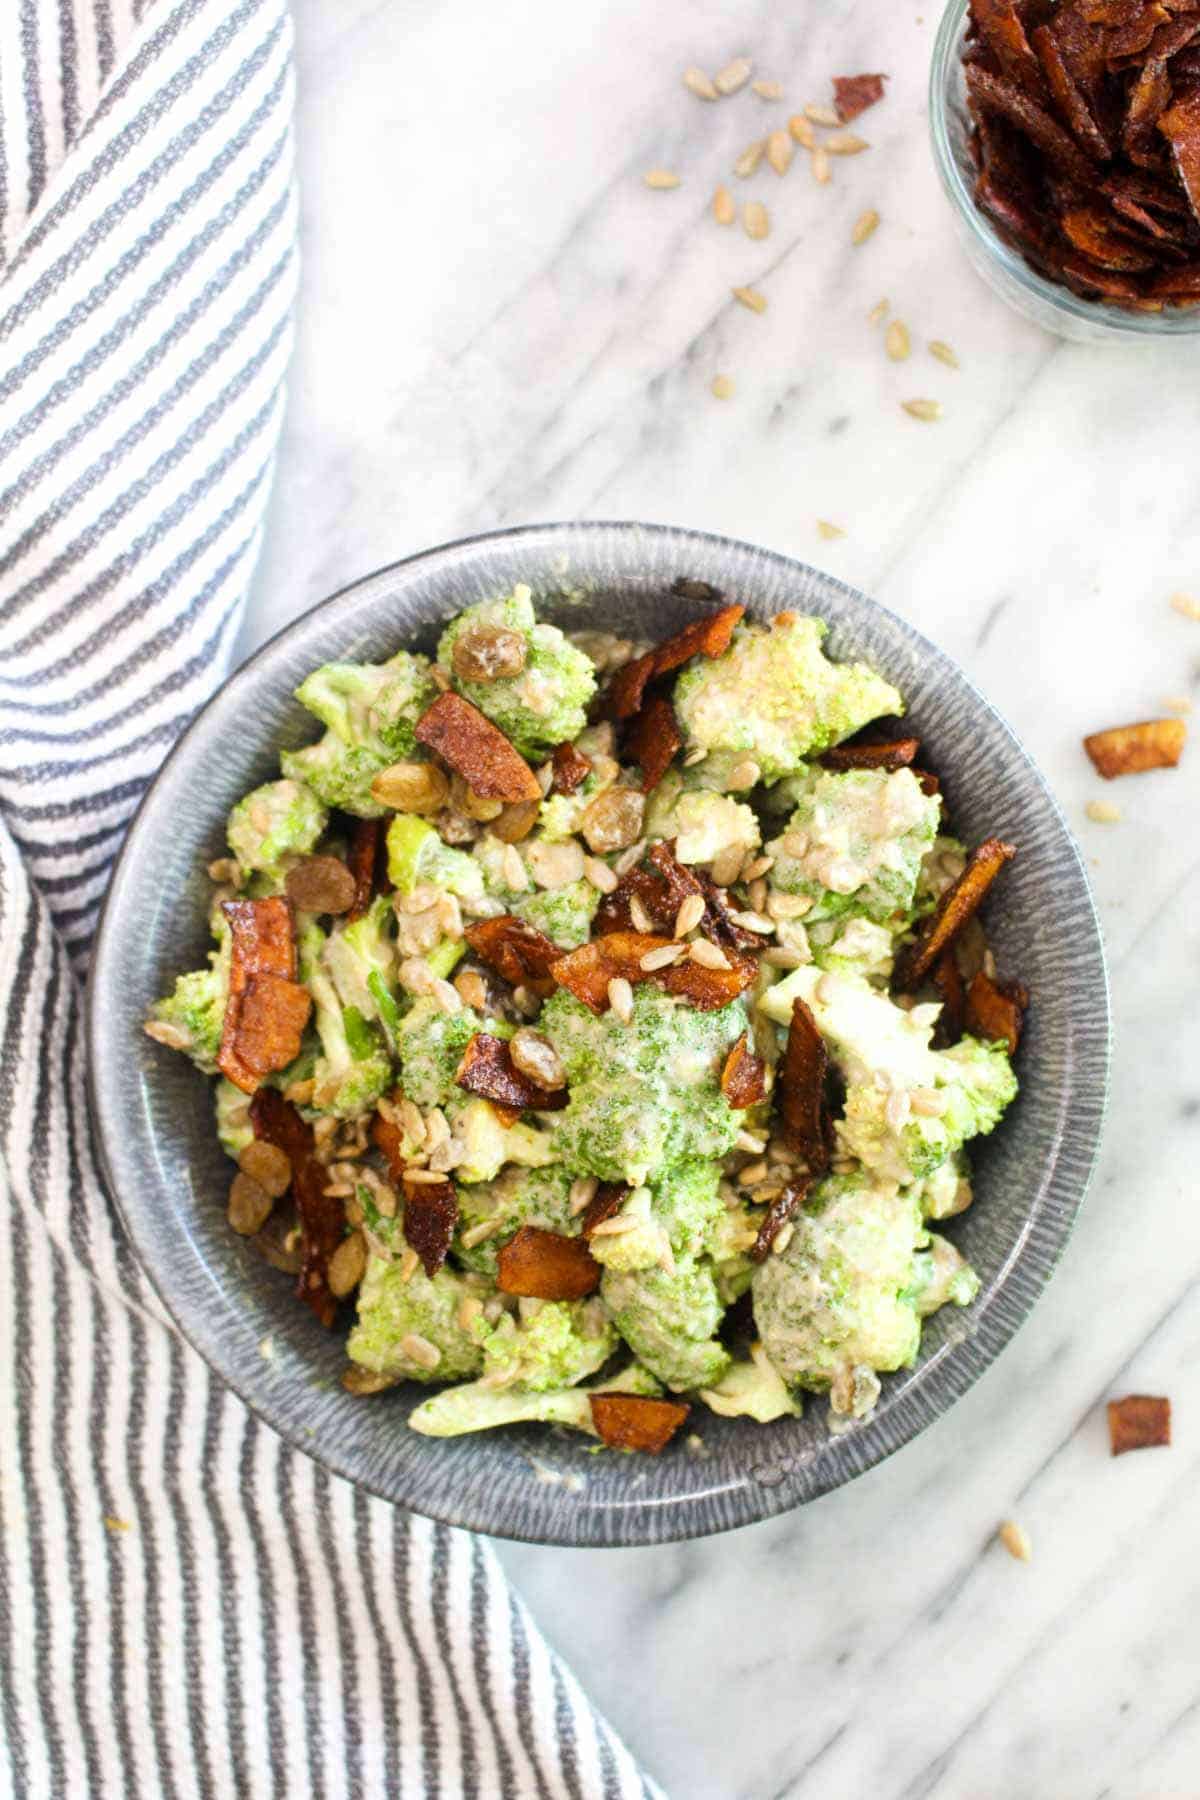 This Healthy Vegan Broccoli Salad is an easy recipe that is BIG on flavor. Broccoli is coated in a sweet and creamy dressing and jazzed up with smokey coconut bacon, toasty seeds, and sweet raisins. 
